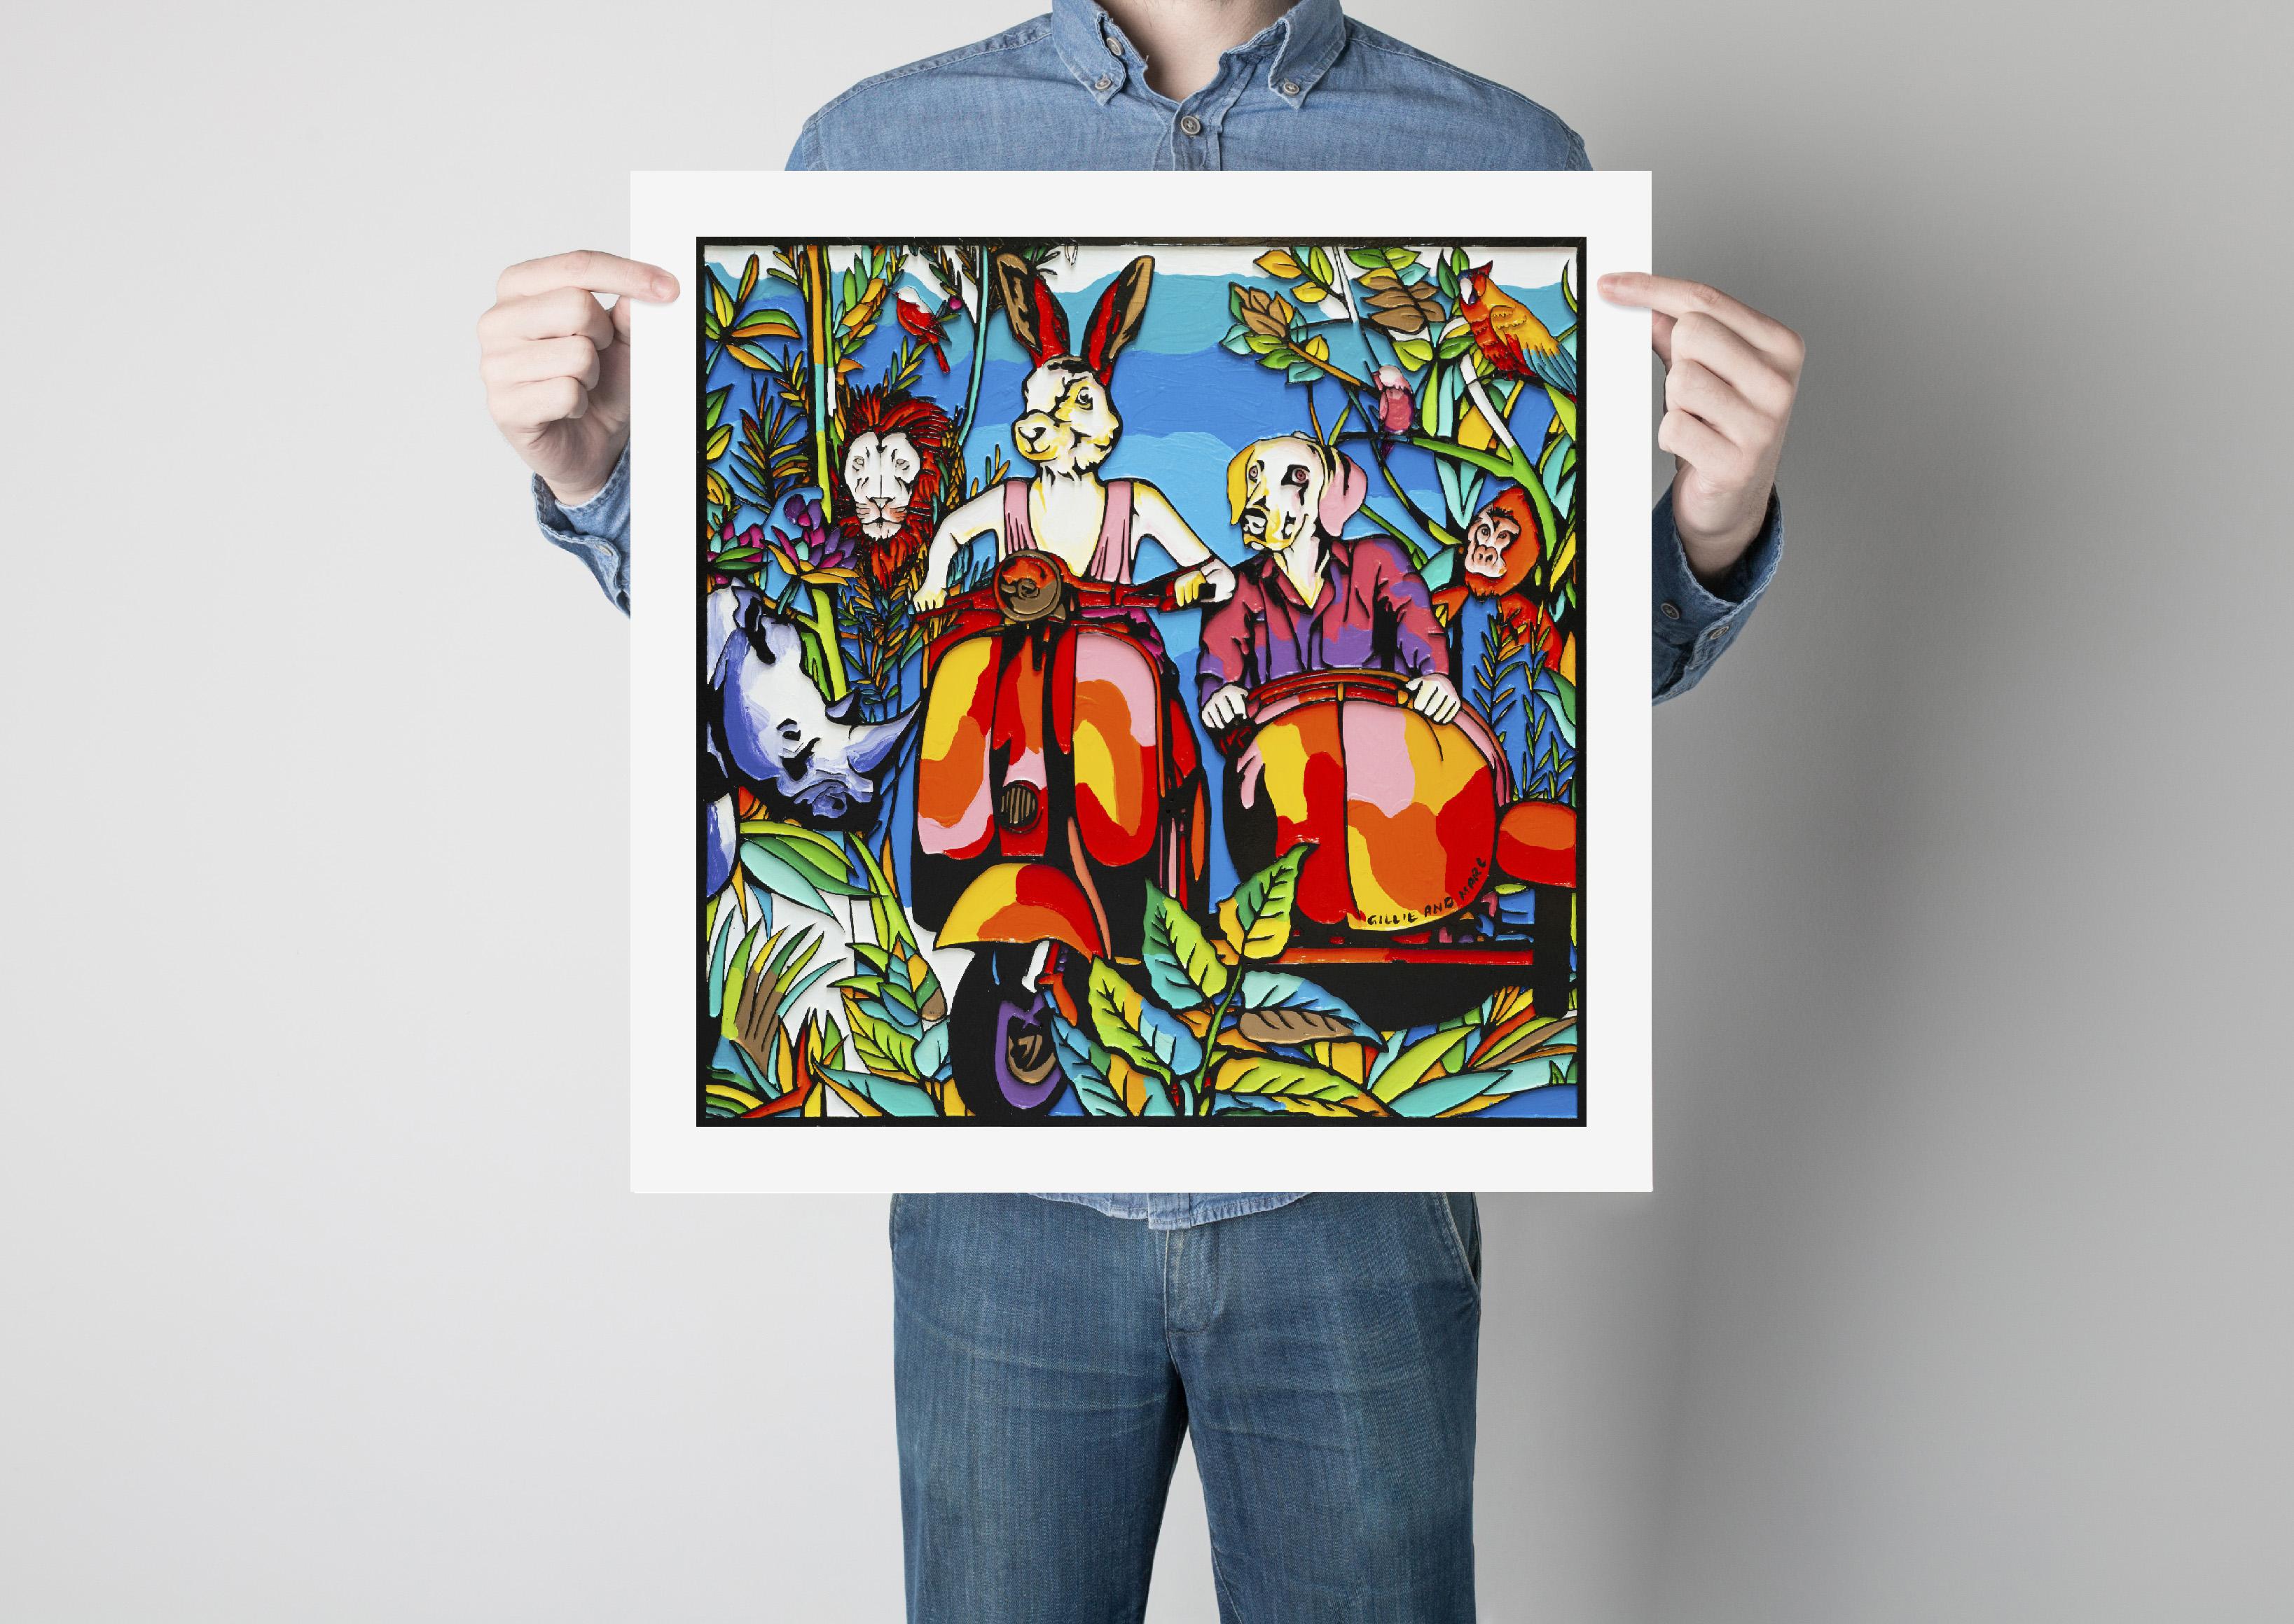 Title: It's love in the jungle
Limited Edition Print

A limited edition giclée print is the perfect solution especially if you missed out on one of Gillie and Marc’s original paintings. 

Gillie and Marc’s prints are signed, limited-editions and are